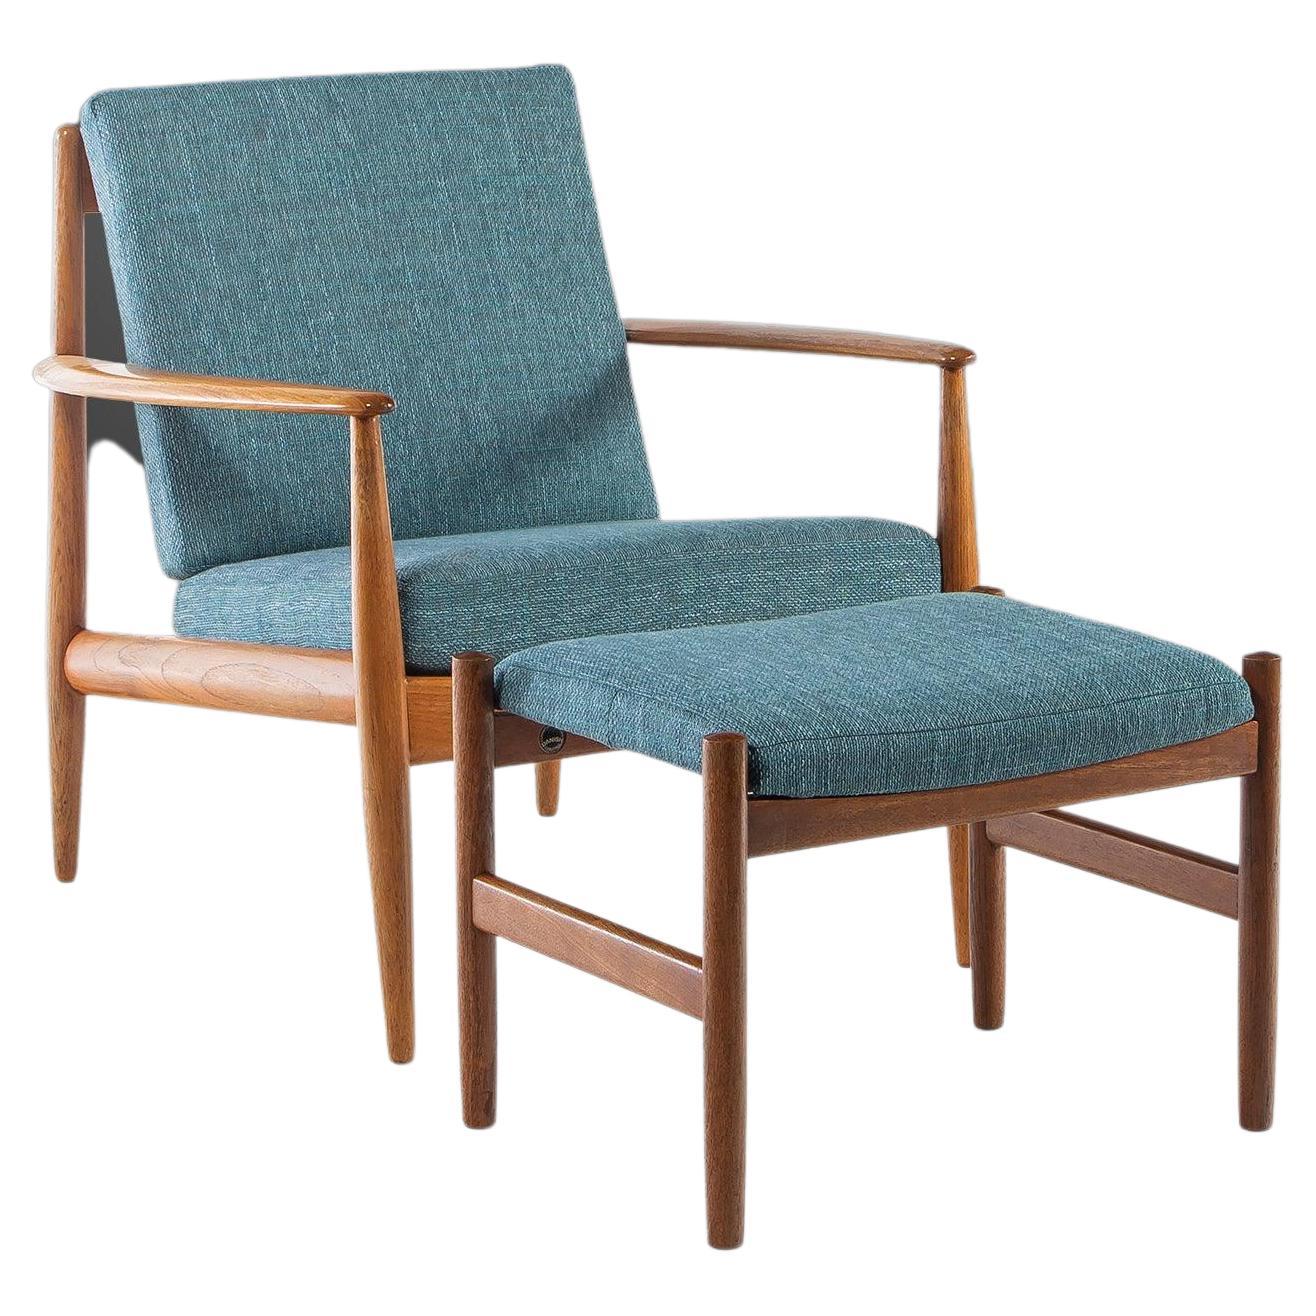 Model 118 Chair by Grete Jalk for France and Sons with Ottoman, Denmark, 1960s For Sale